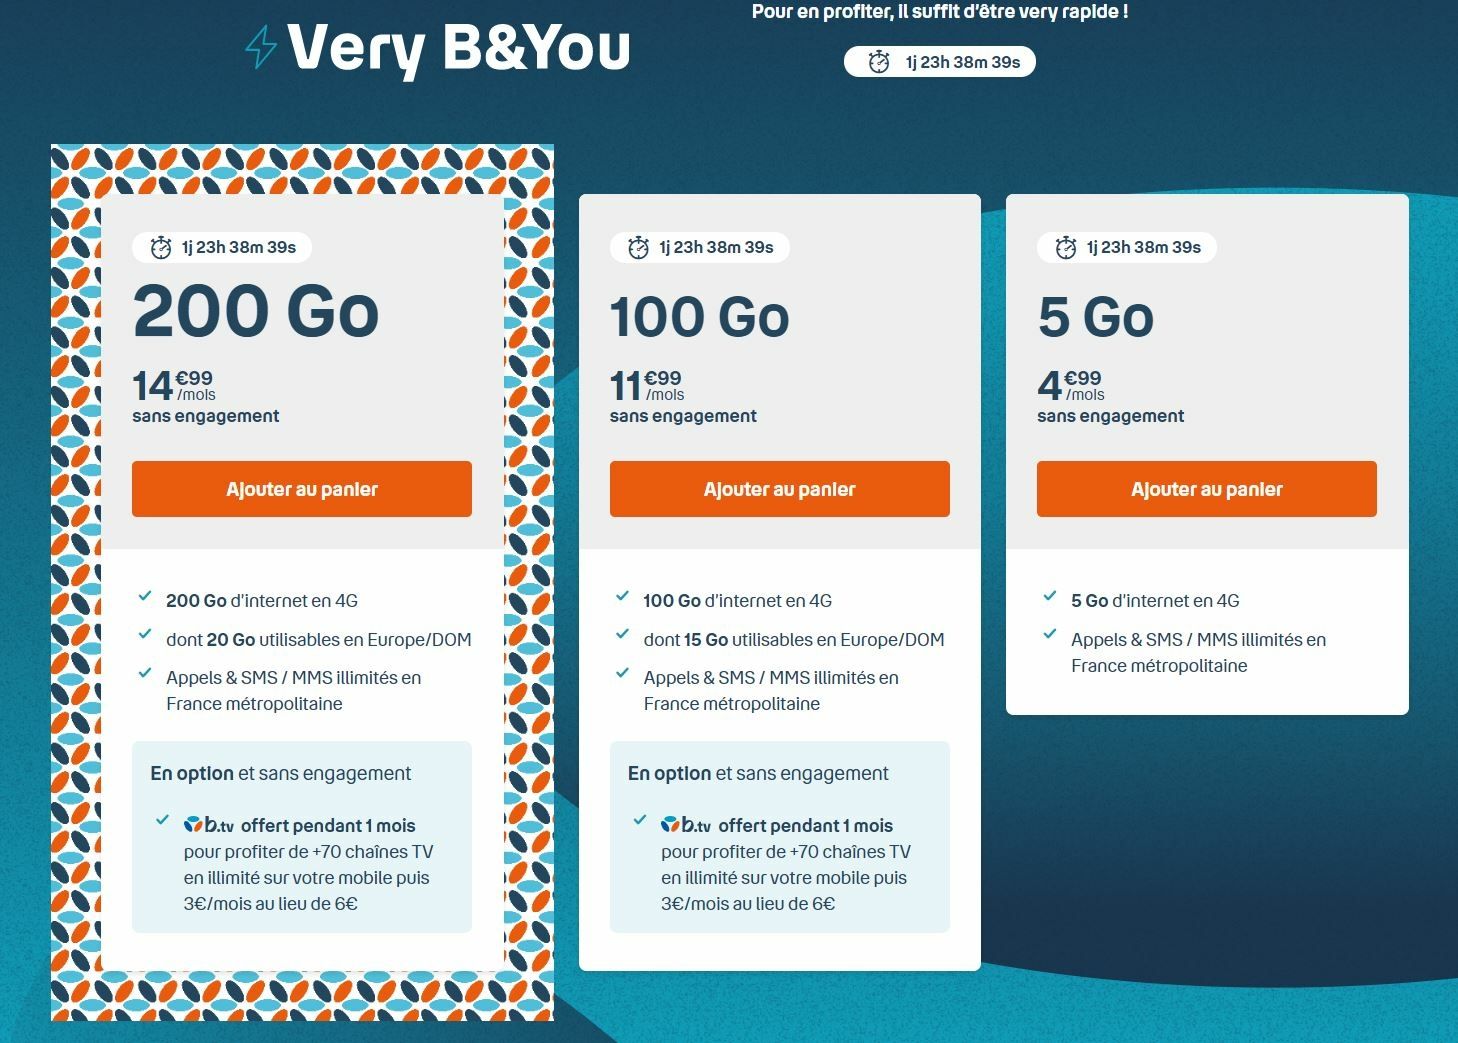 very-bouygues-telecom-forfait-mobile